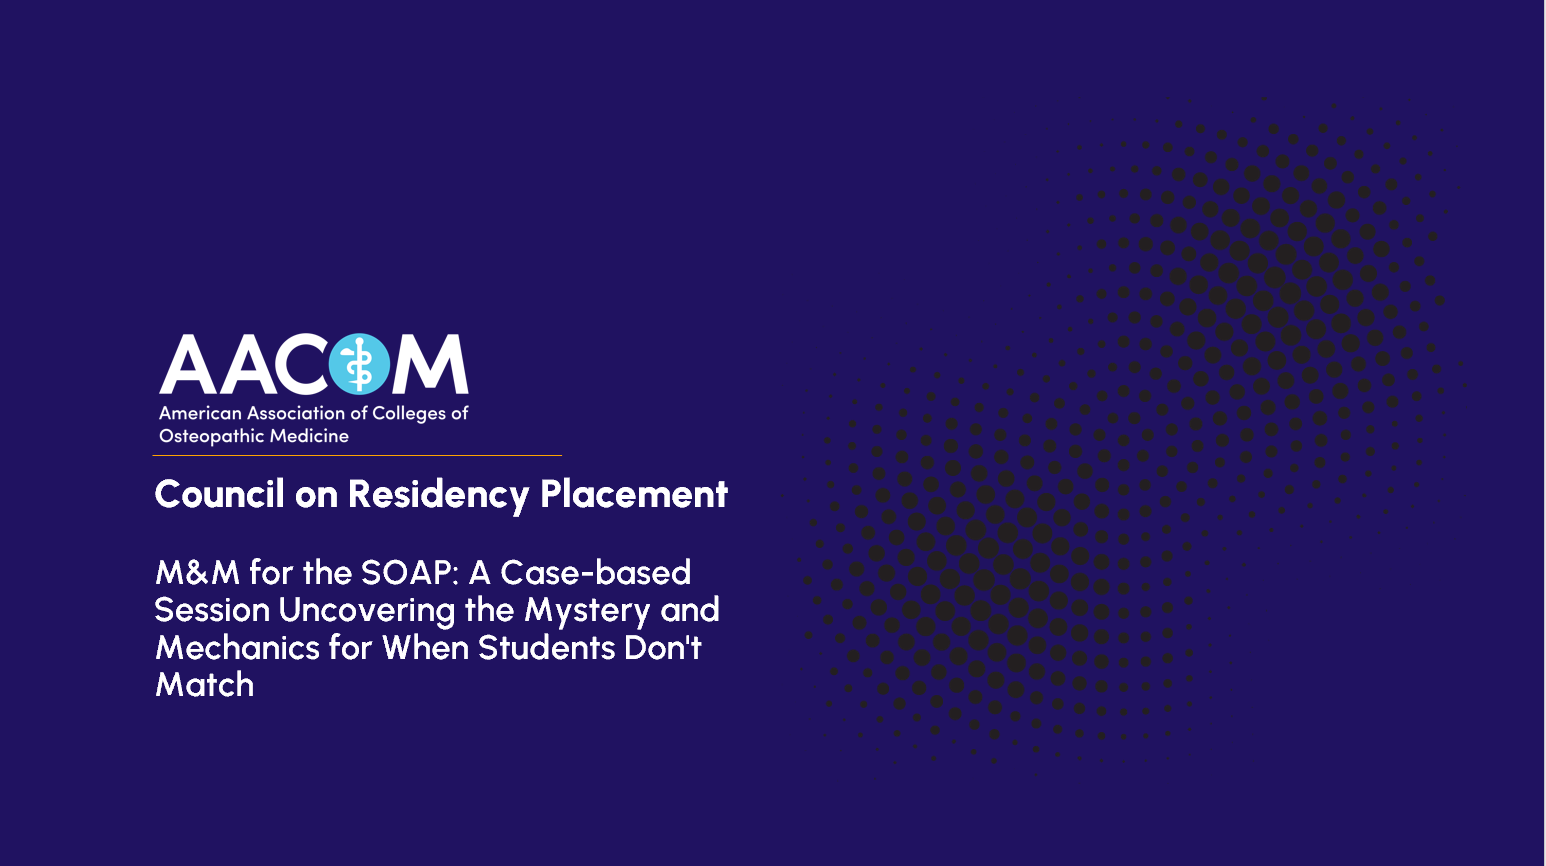 M&M for the SOAP: A Case-based Session Uncovering the Mystery and Mechanics for When Students Don't Match